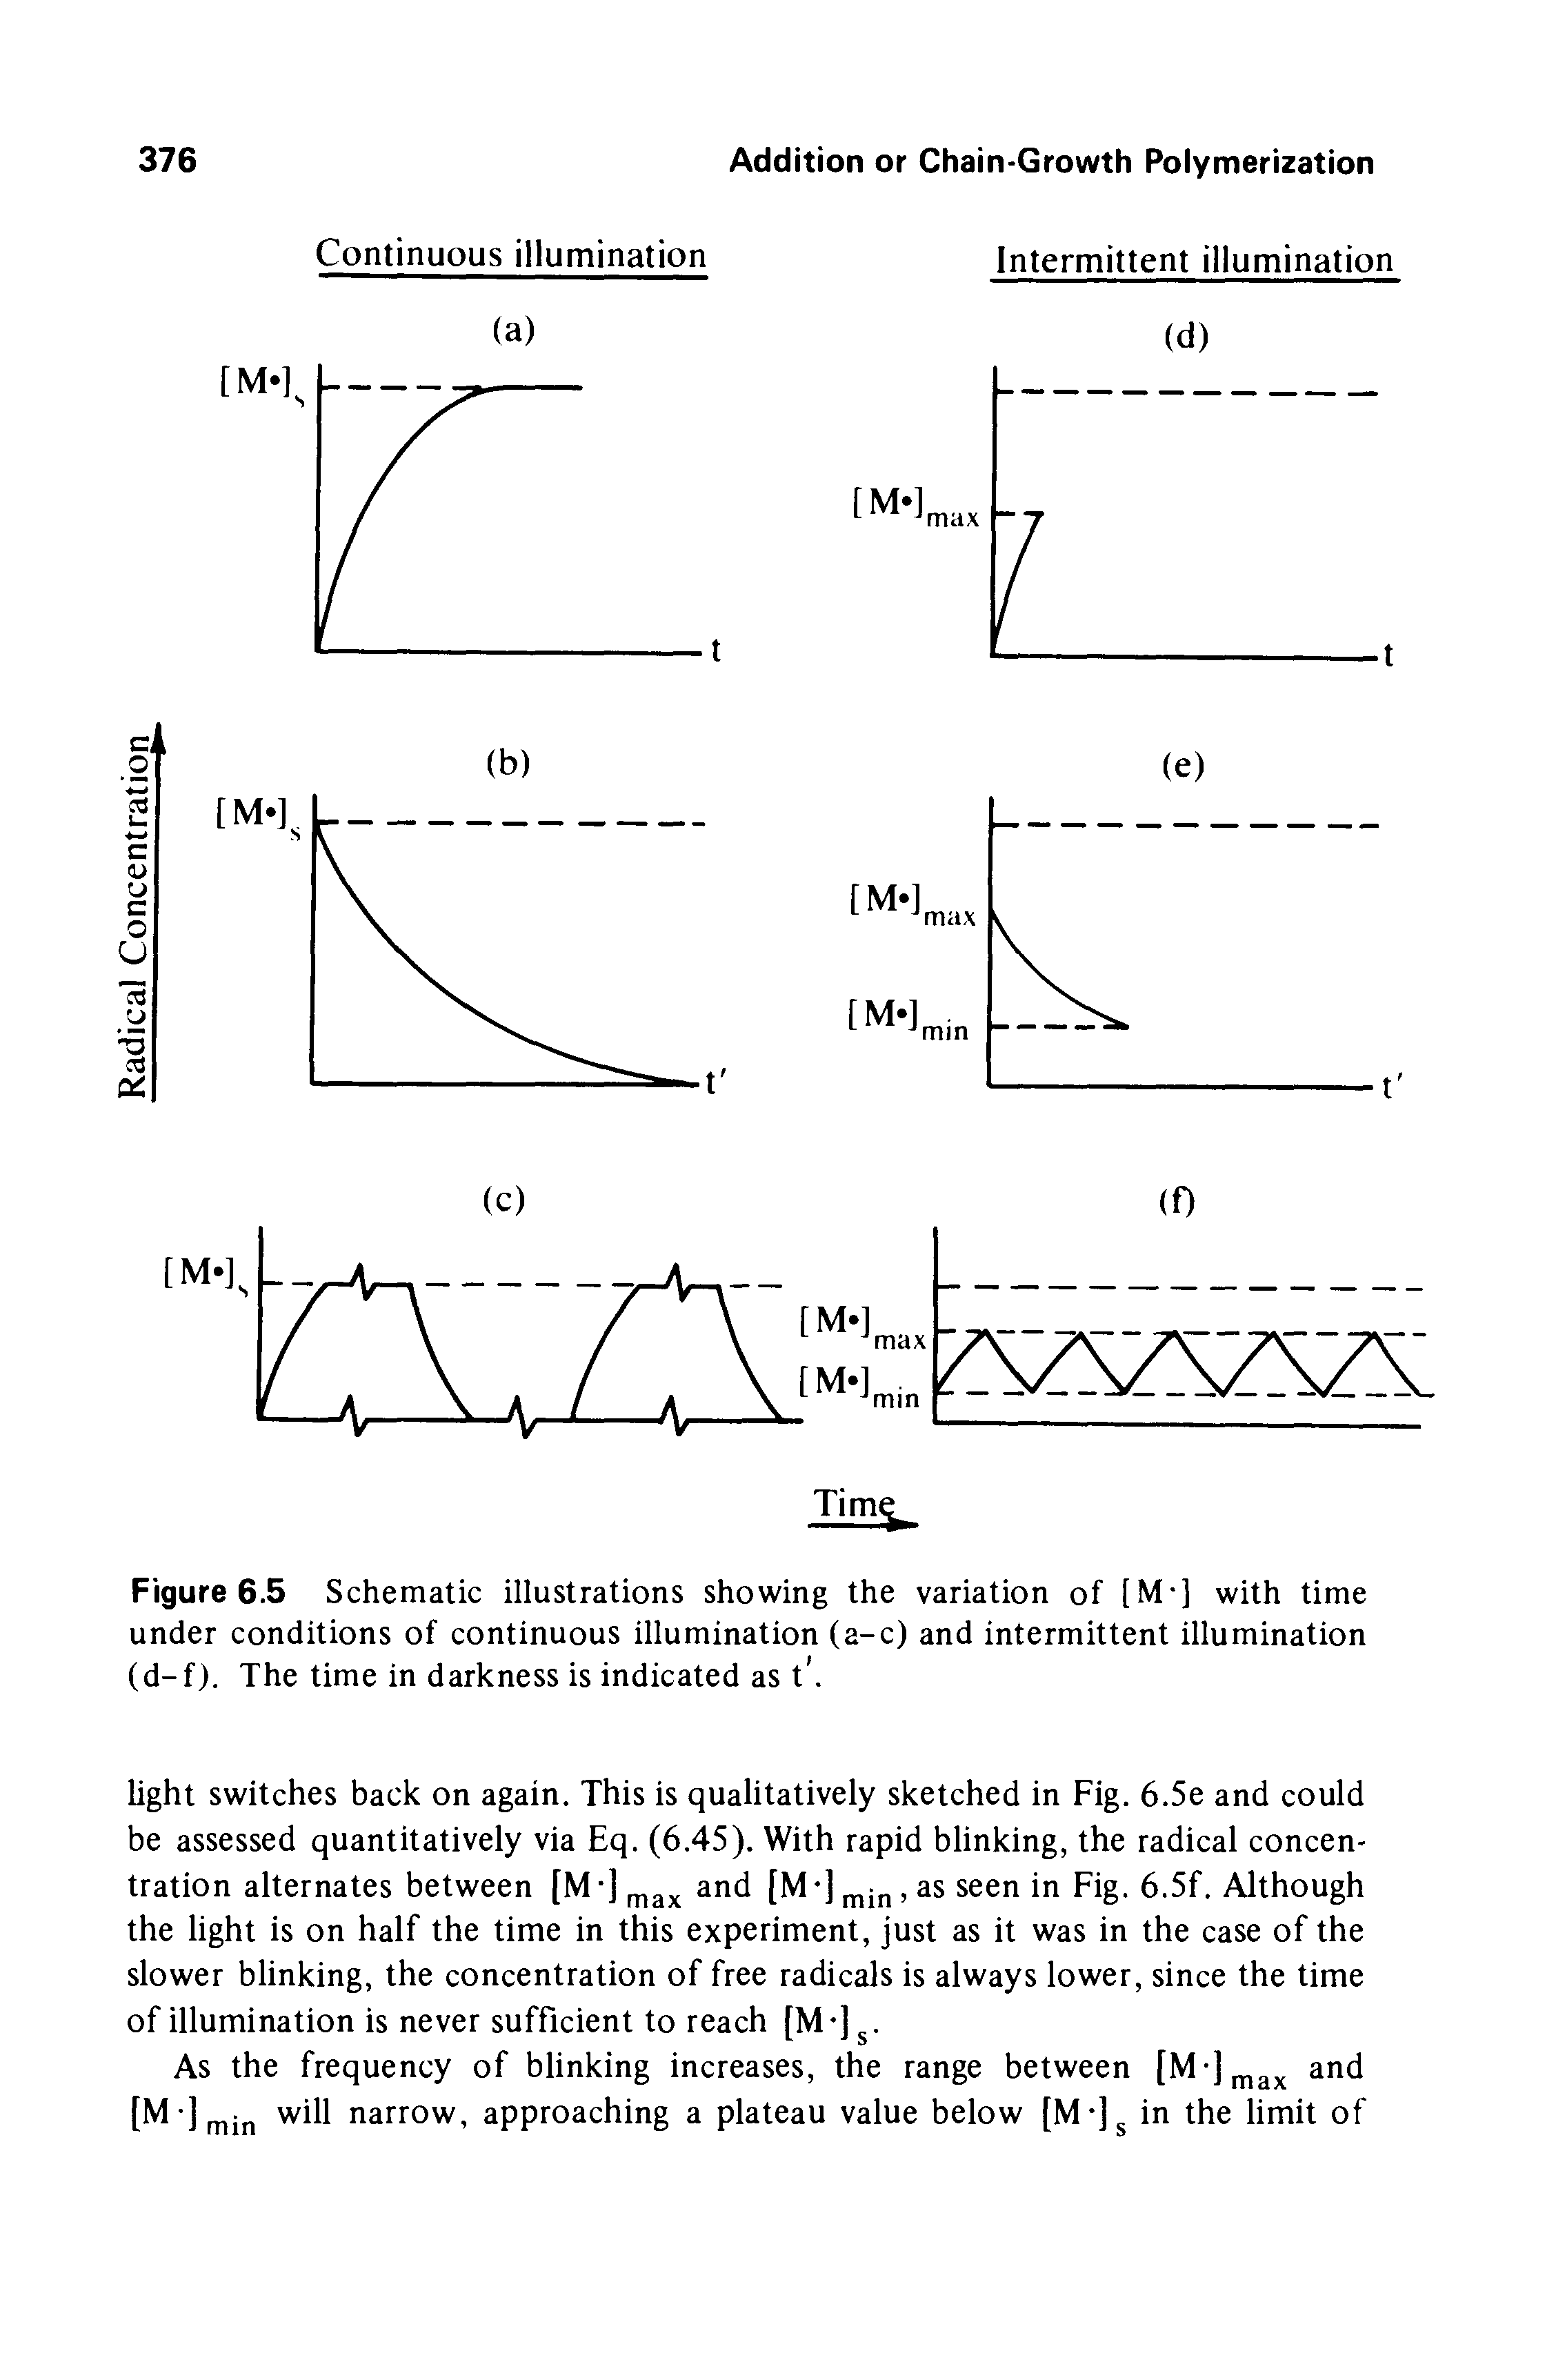 Figure 6.5 Schematic illustrations showing the variation of [M-] with time under conditions of continuous illumination (a-c) and intermittent illumination (d-f). The time in darkness is indicated as t. ...